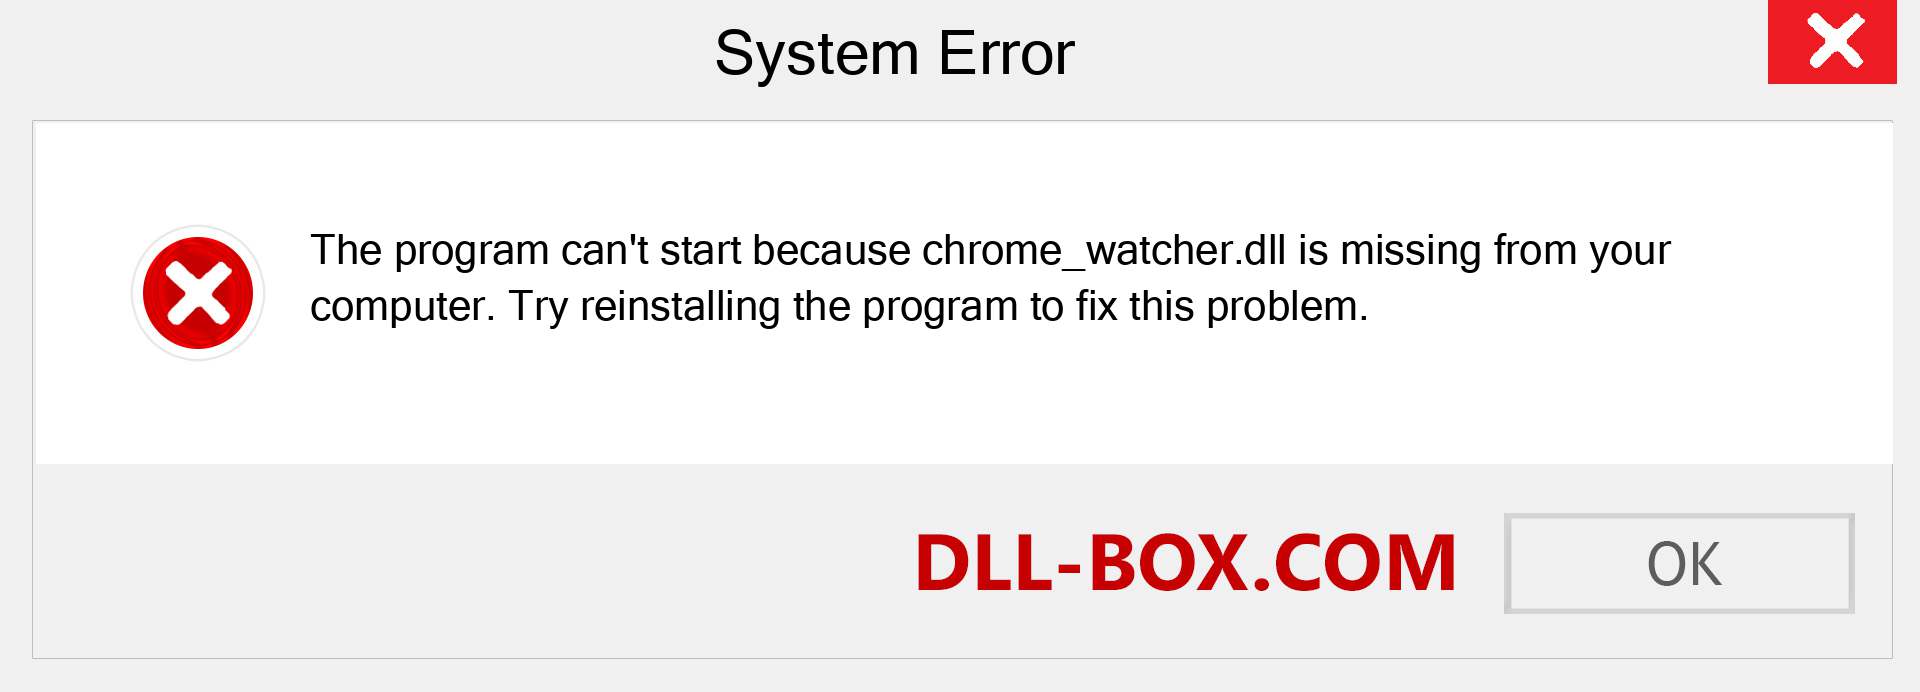  chrome_watcher.dll file is missing?. Download for Windows 7, 8, 10 - Fix  chrome_watcher dll Missing Error on Windows, photos, images